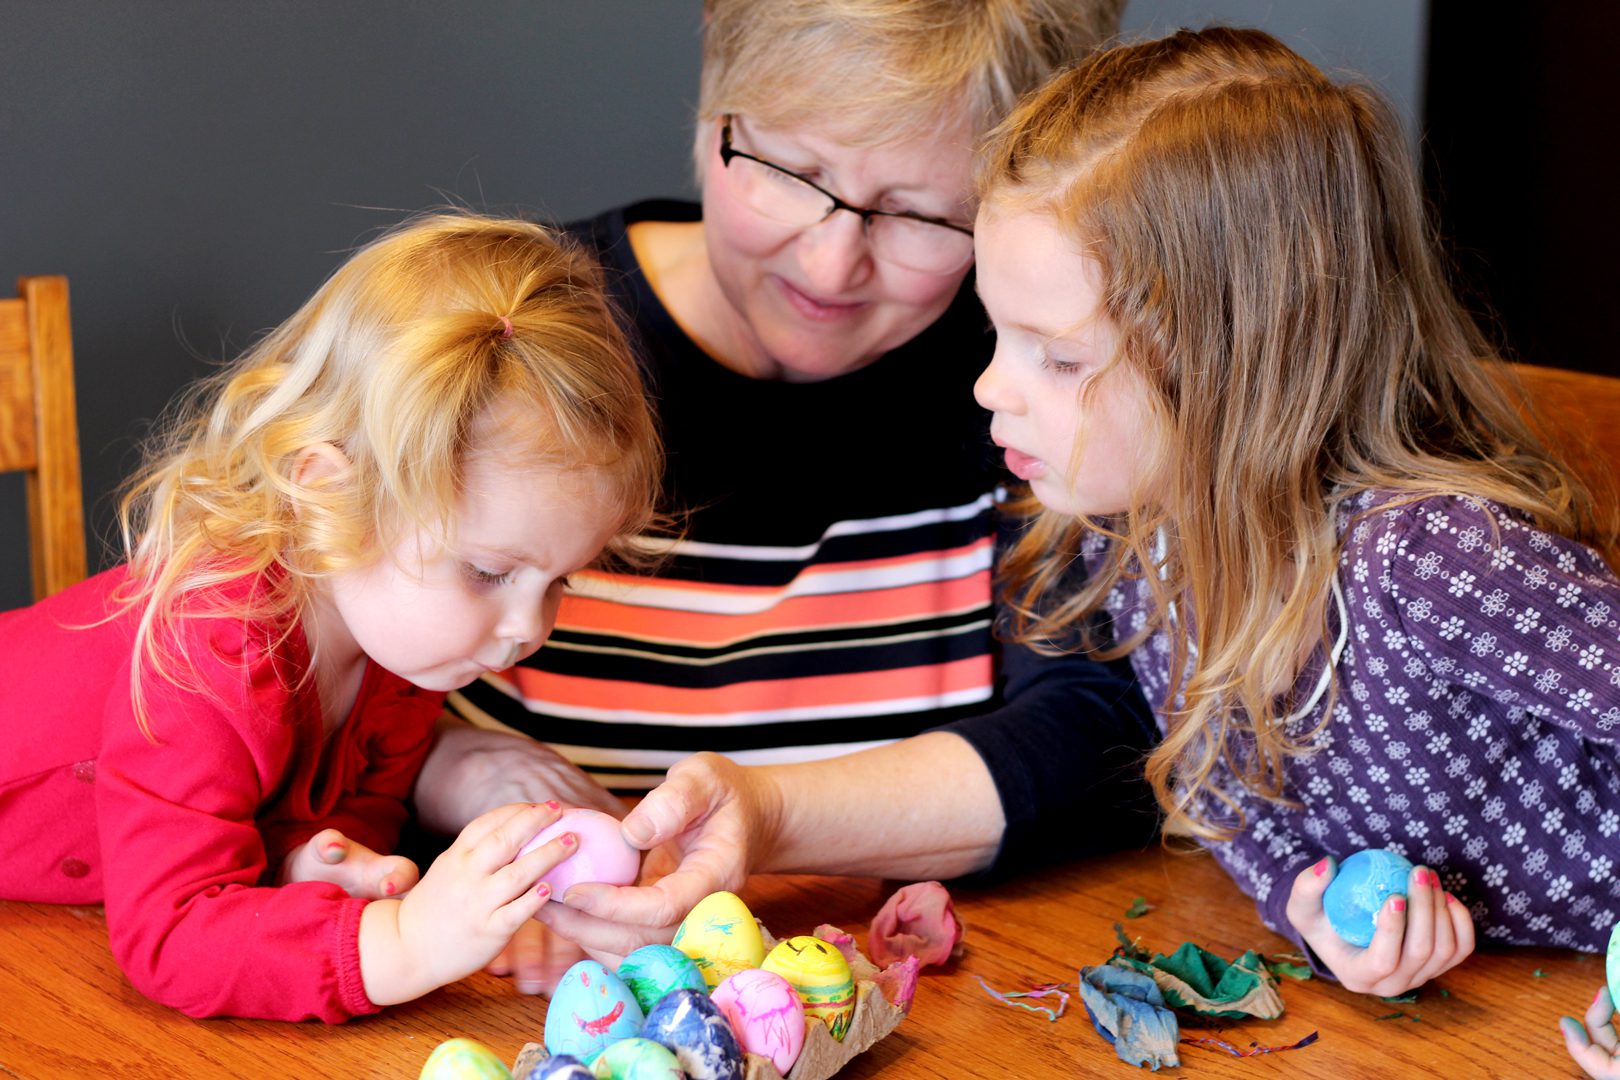 Kids and their grandma looking at colorful decorated Easter Eggs.